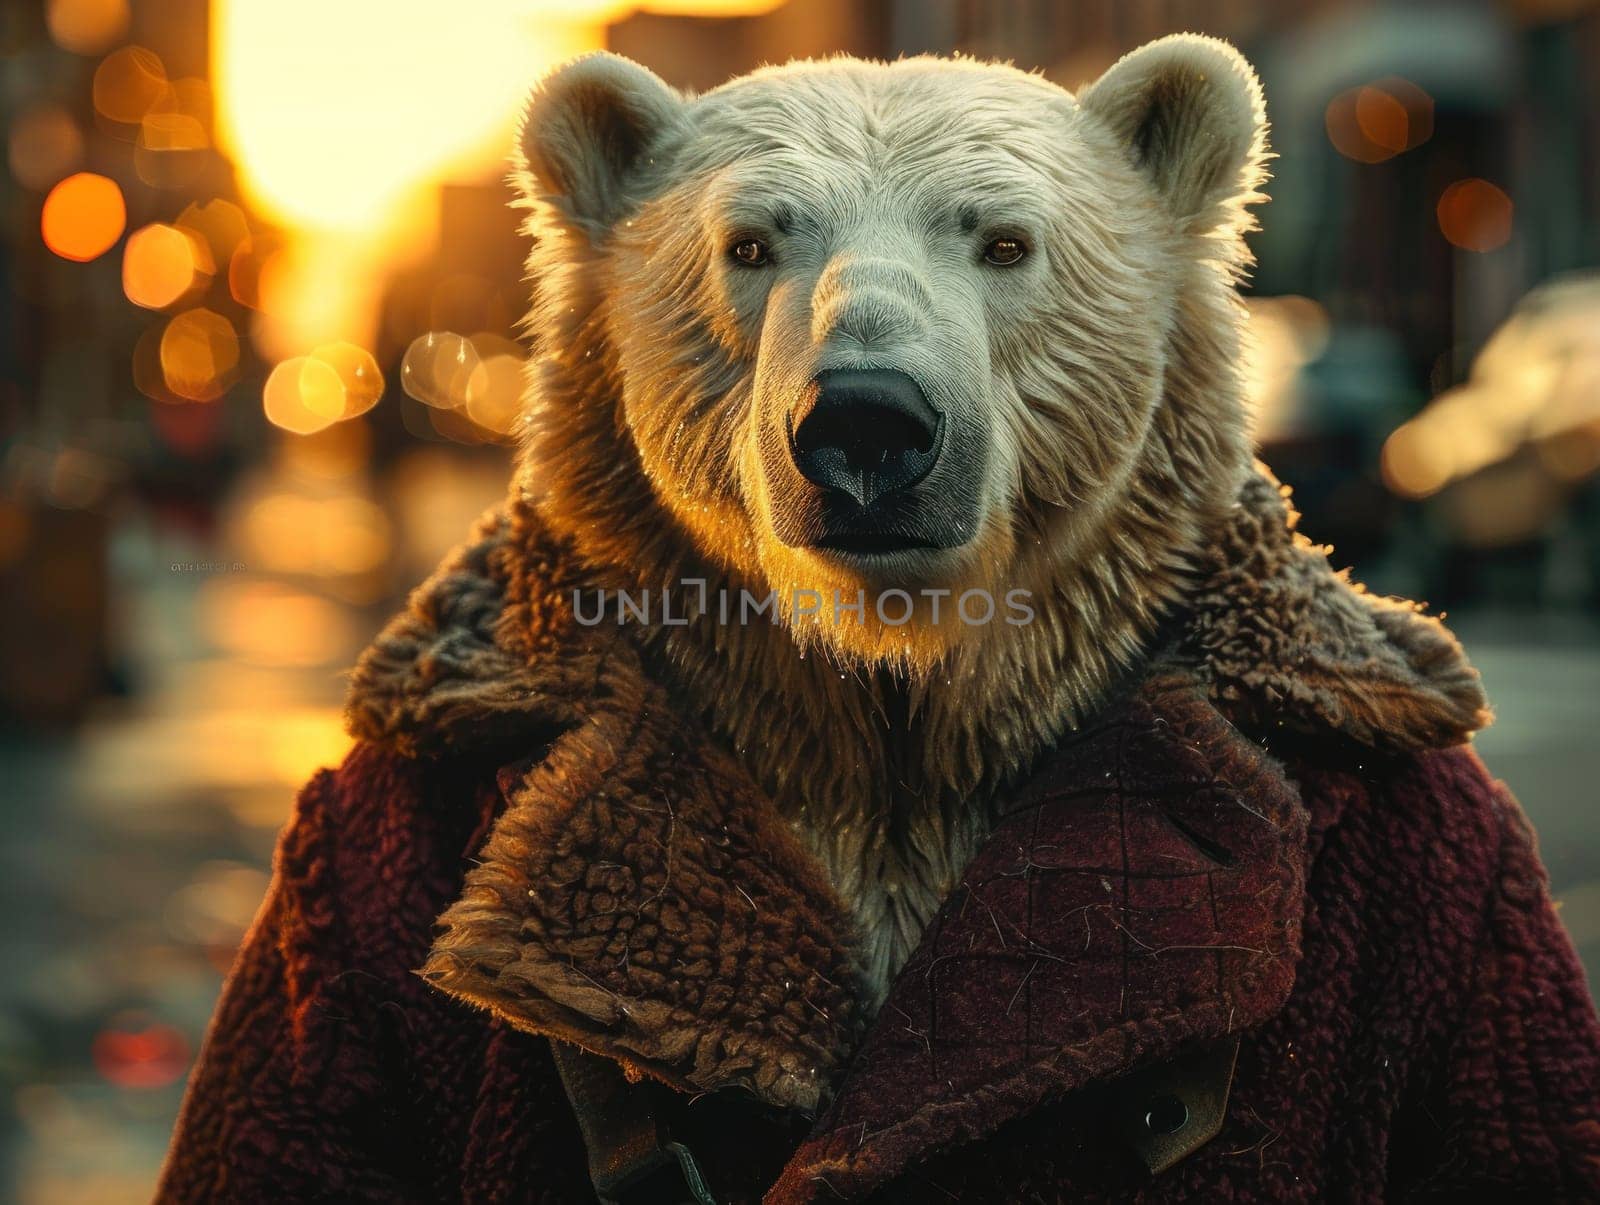 A bear wearing a red coat and a brown fur hat. The bear is looking at the camera